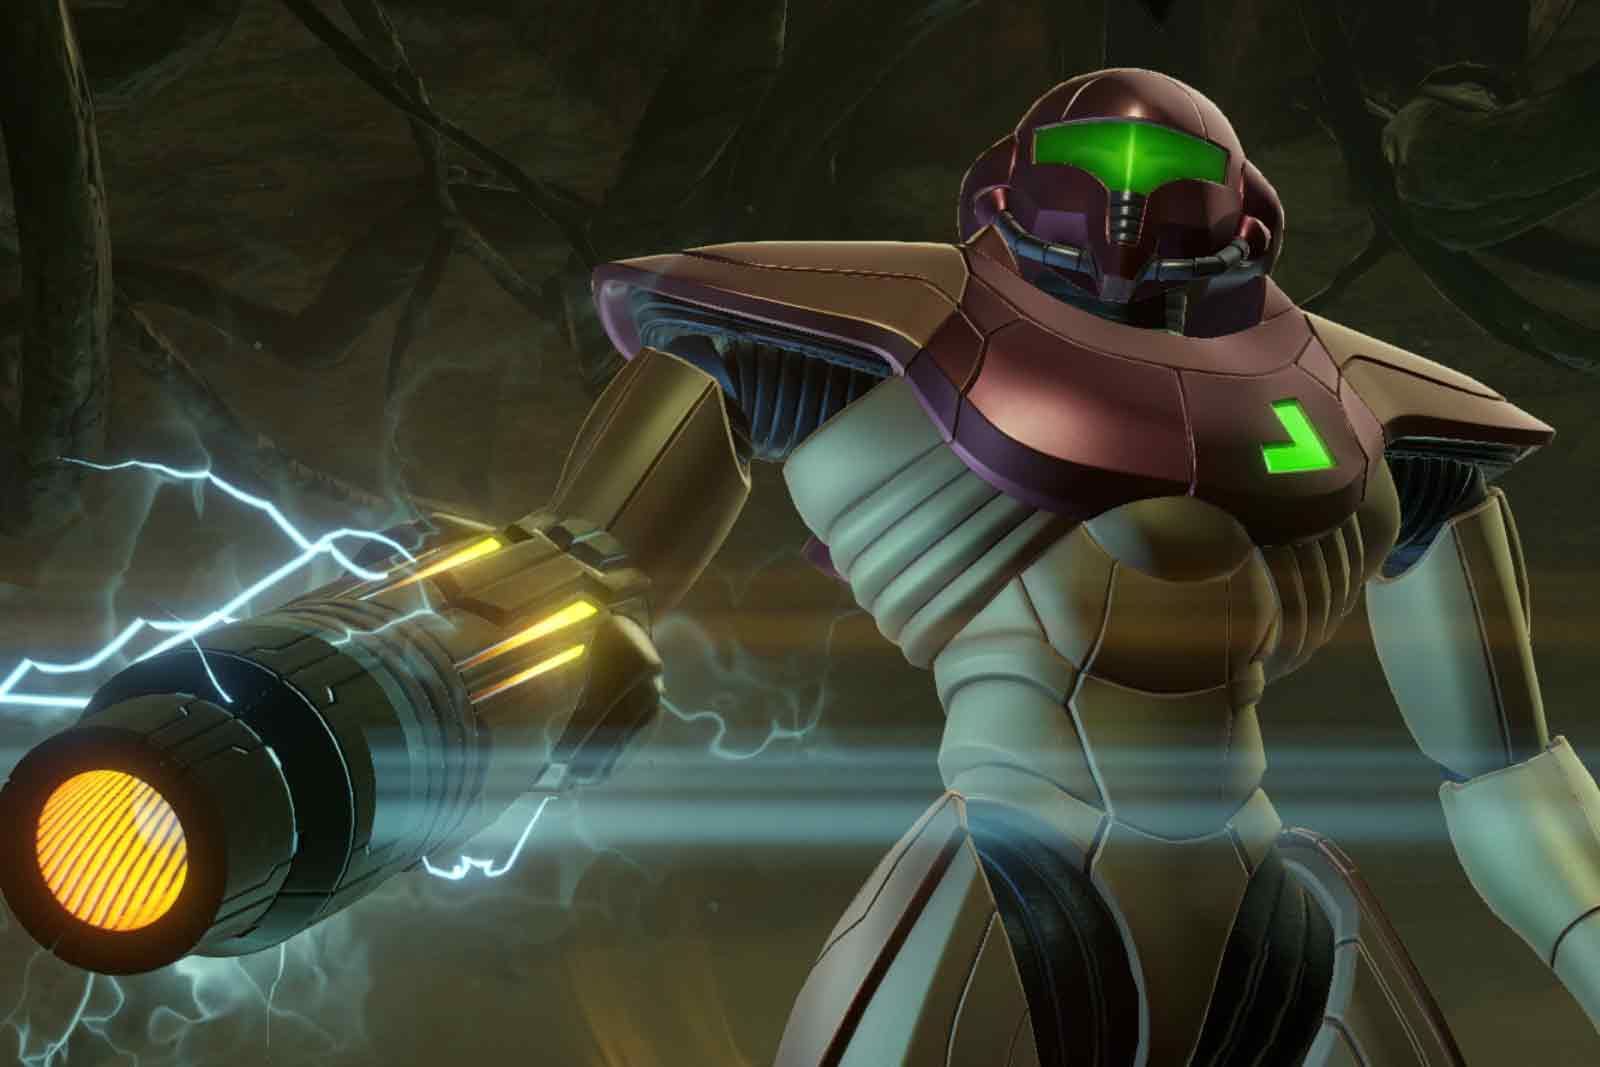 Metroid Prime Remastered review: The good old days